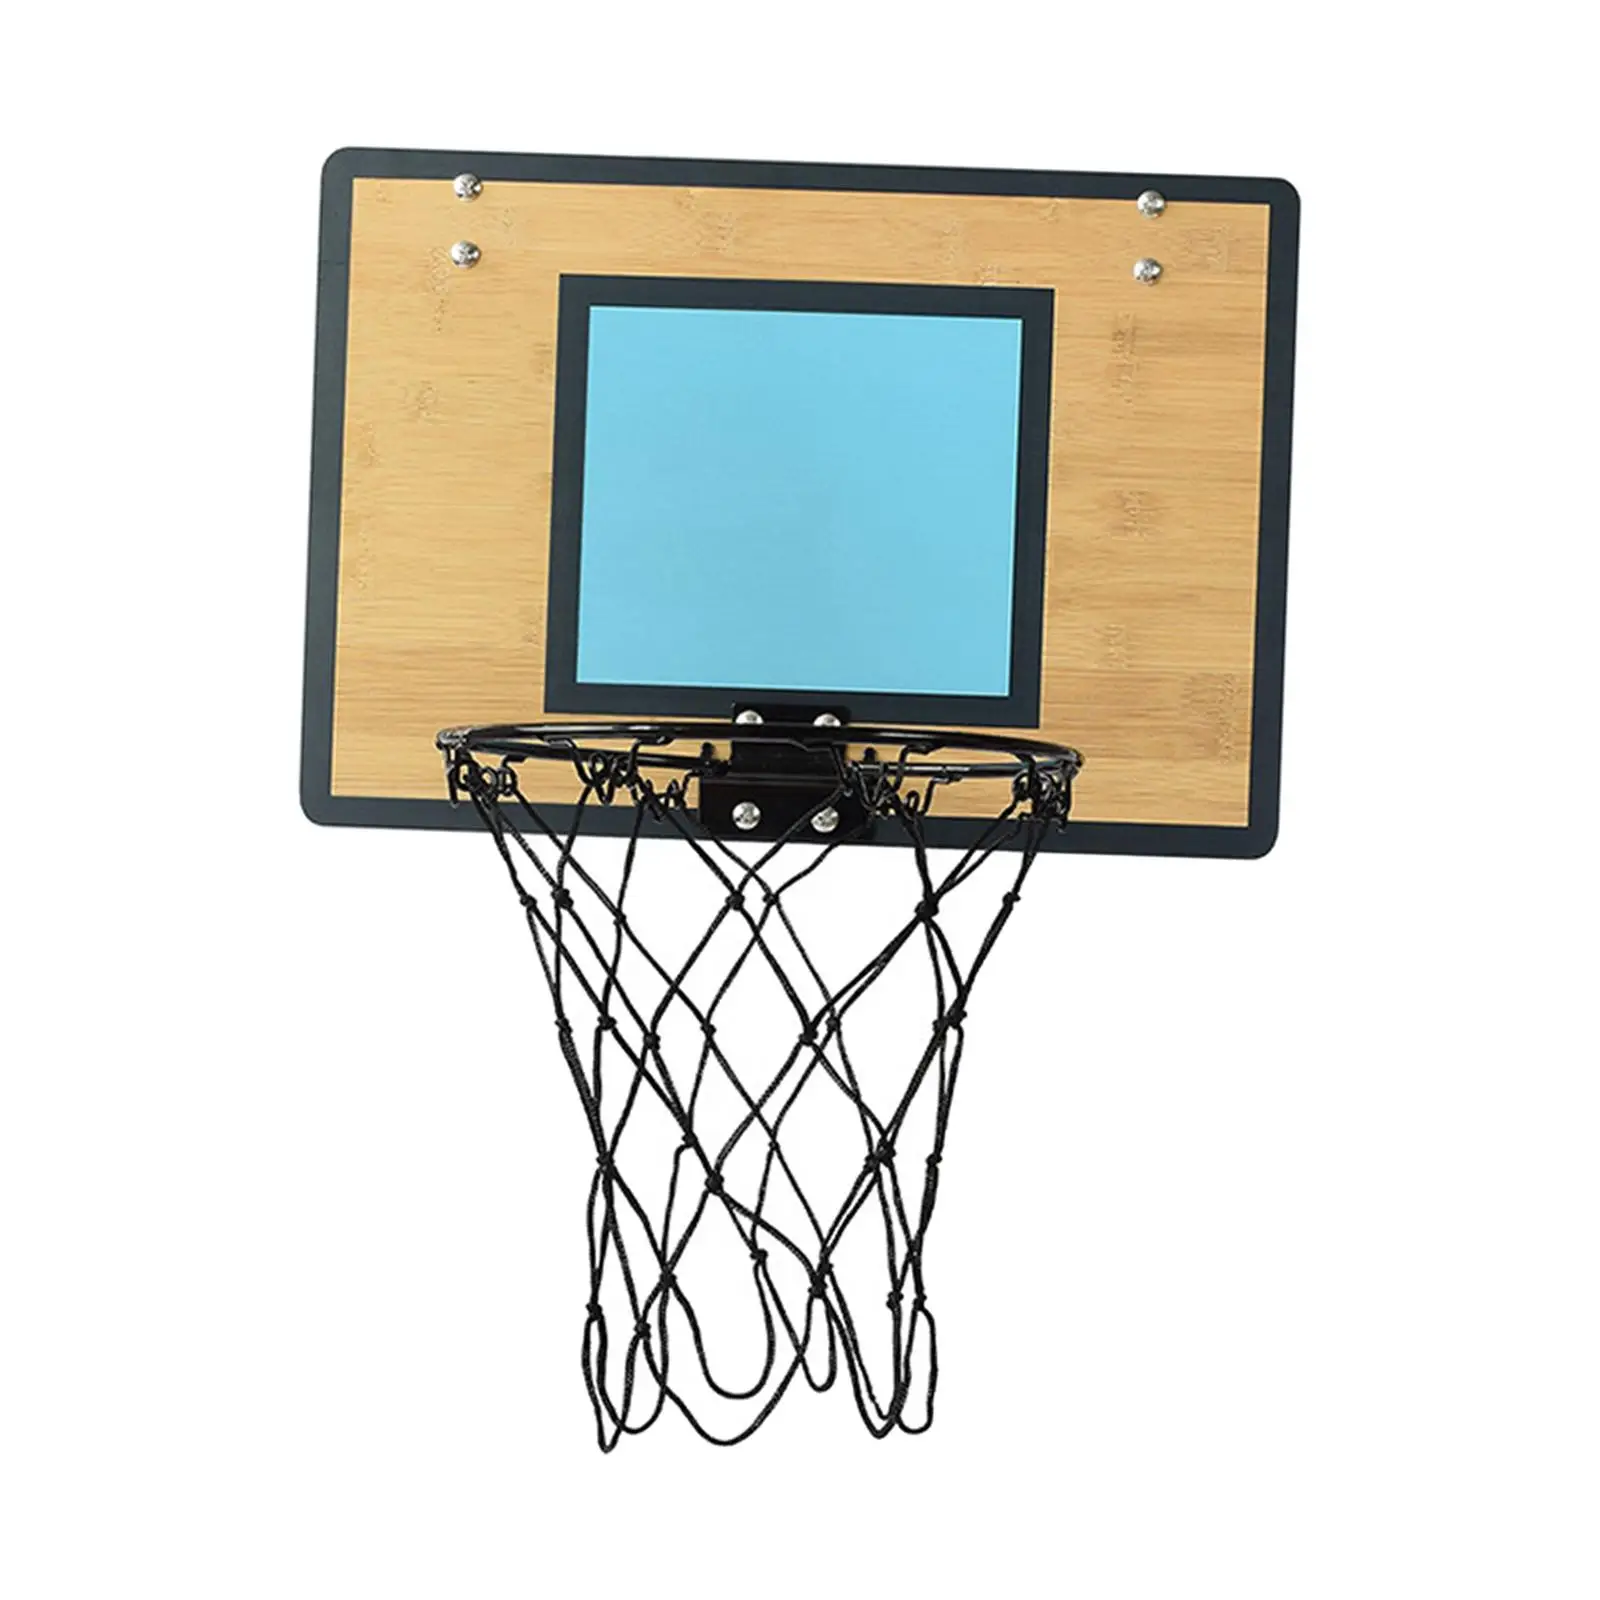 Mini Basketball Hoop over The Door Bamboo Backboard Basketball Goal Basketball Game Toy for Room Office Gifts for Kids Teens